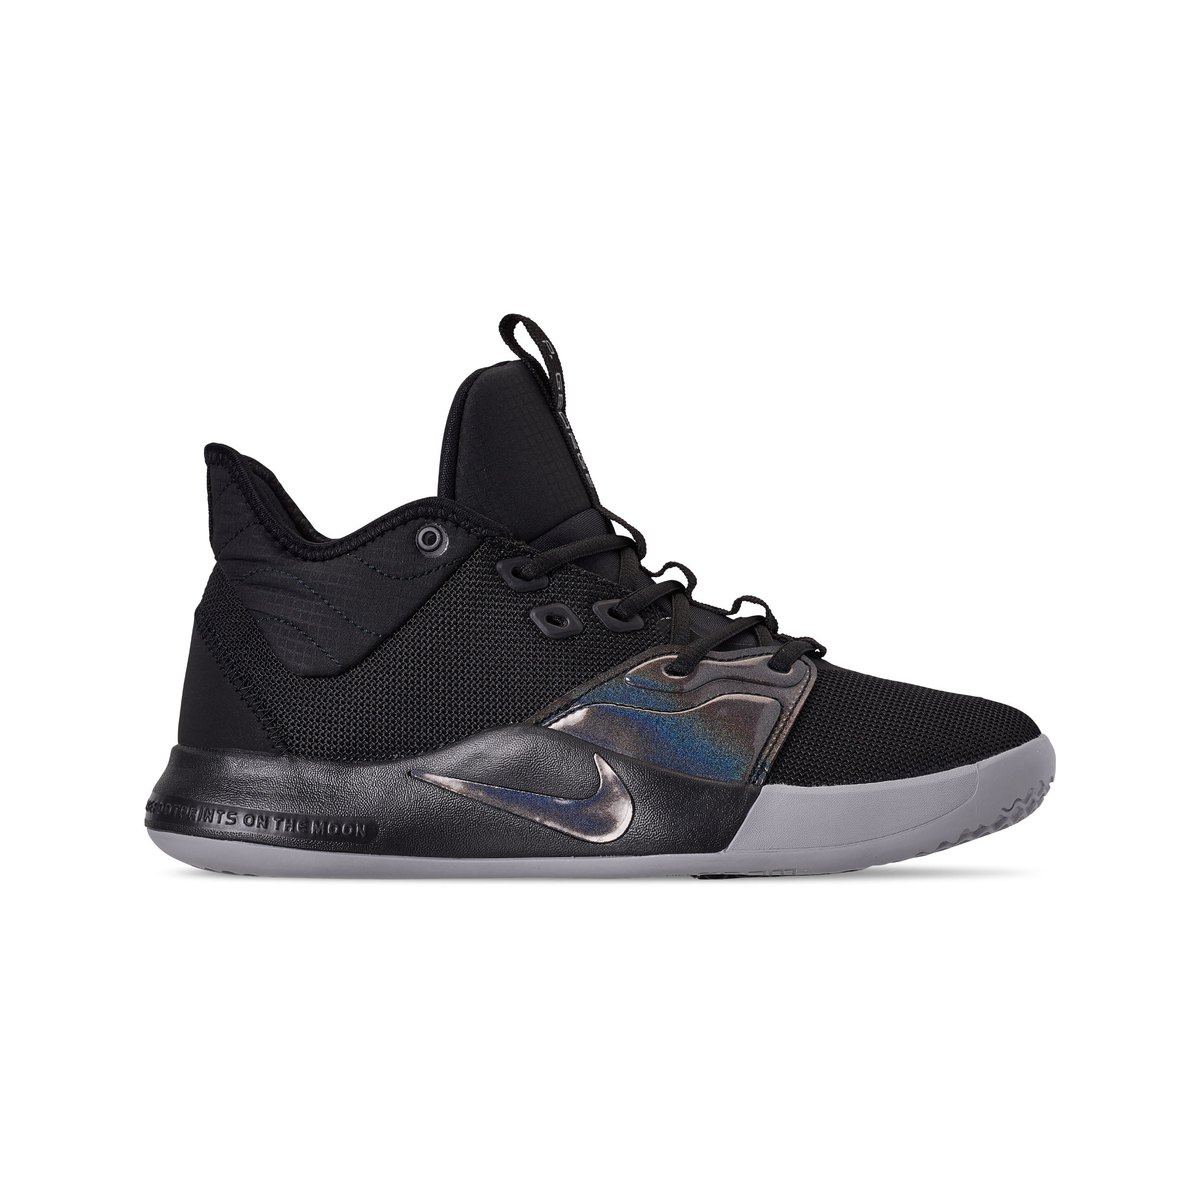 pg 3 new release